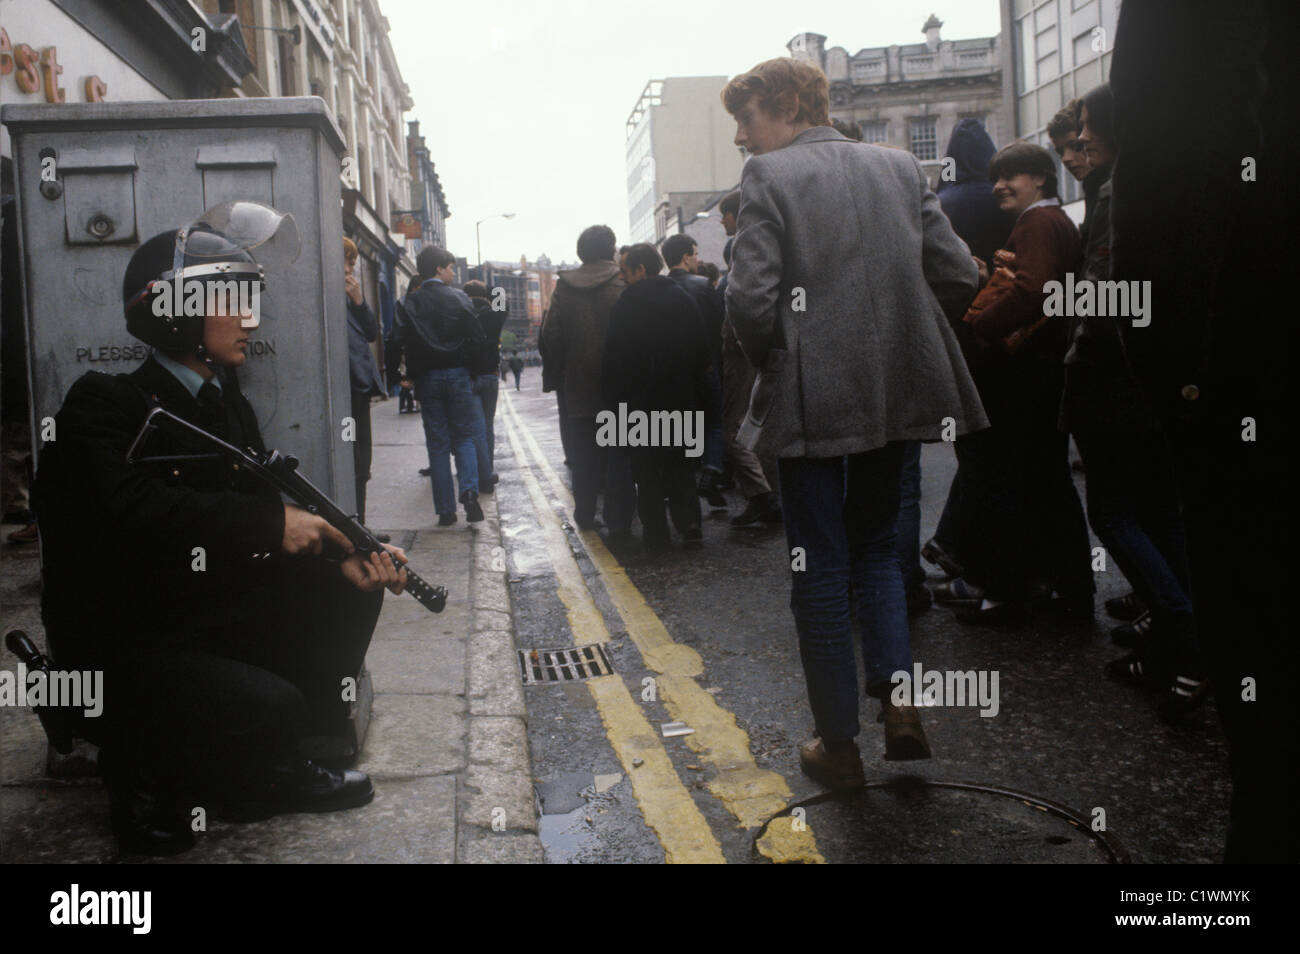 Northern Ireland The Troubles 1980s. RUC policeman on  foot patrol rifle that shoots rubber bullets centre of Belfast 1981. Group of lads   milling around potential trouble.  HOMER SYKES Stock Photo